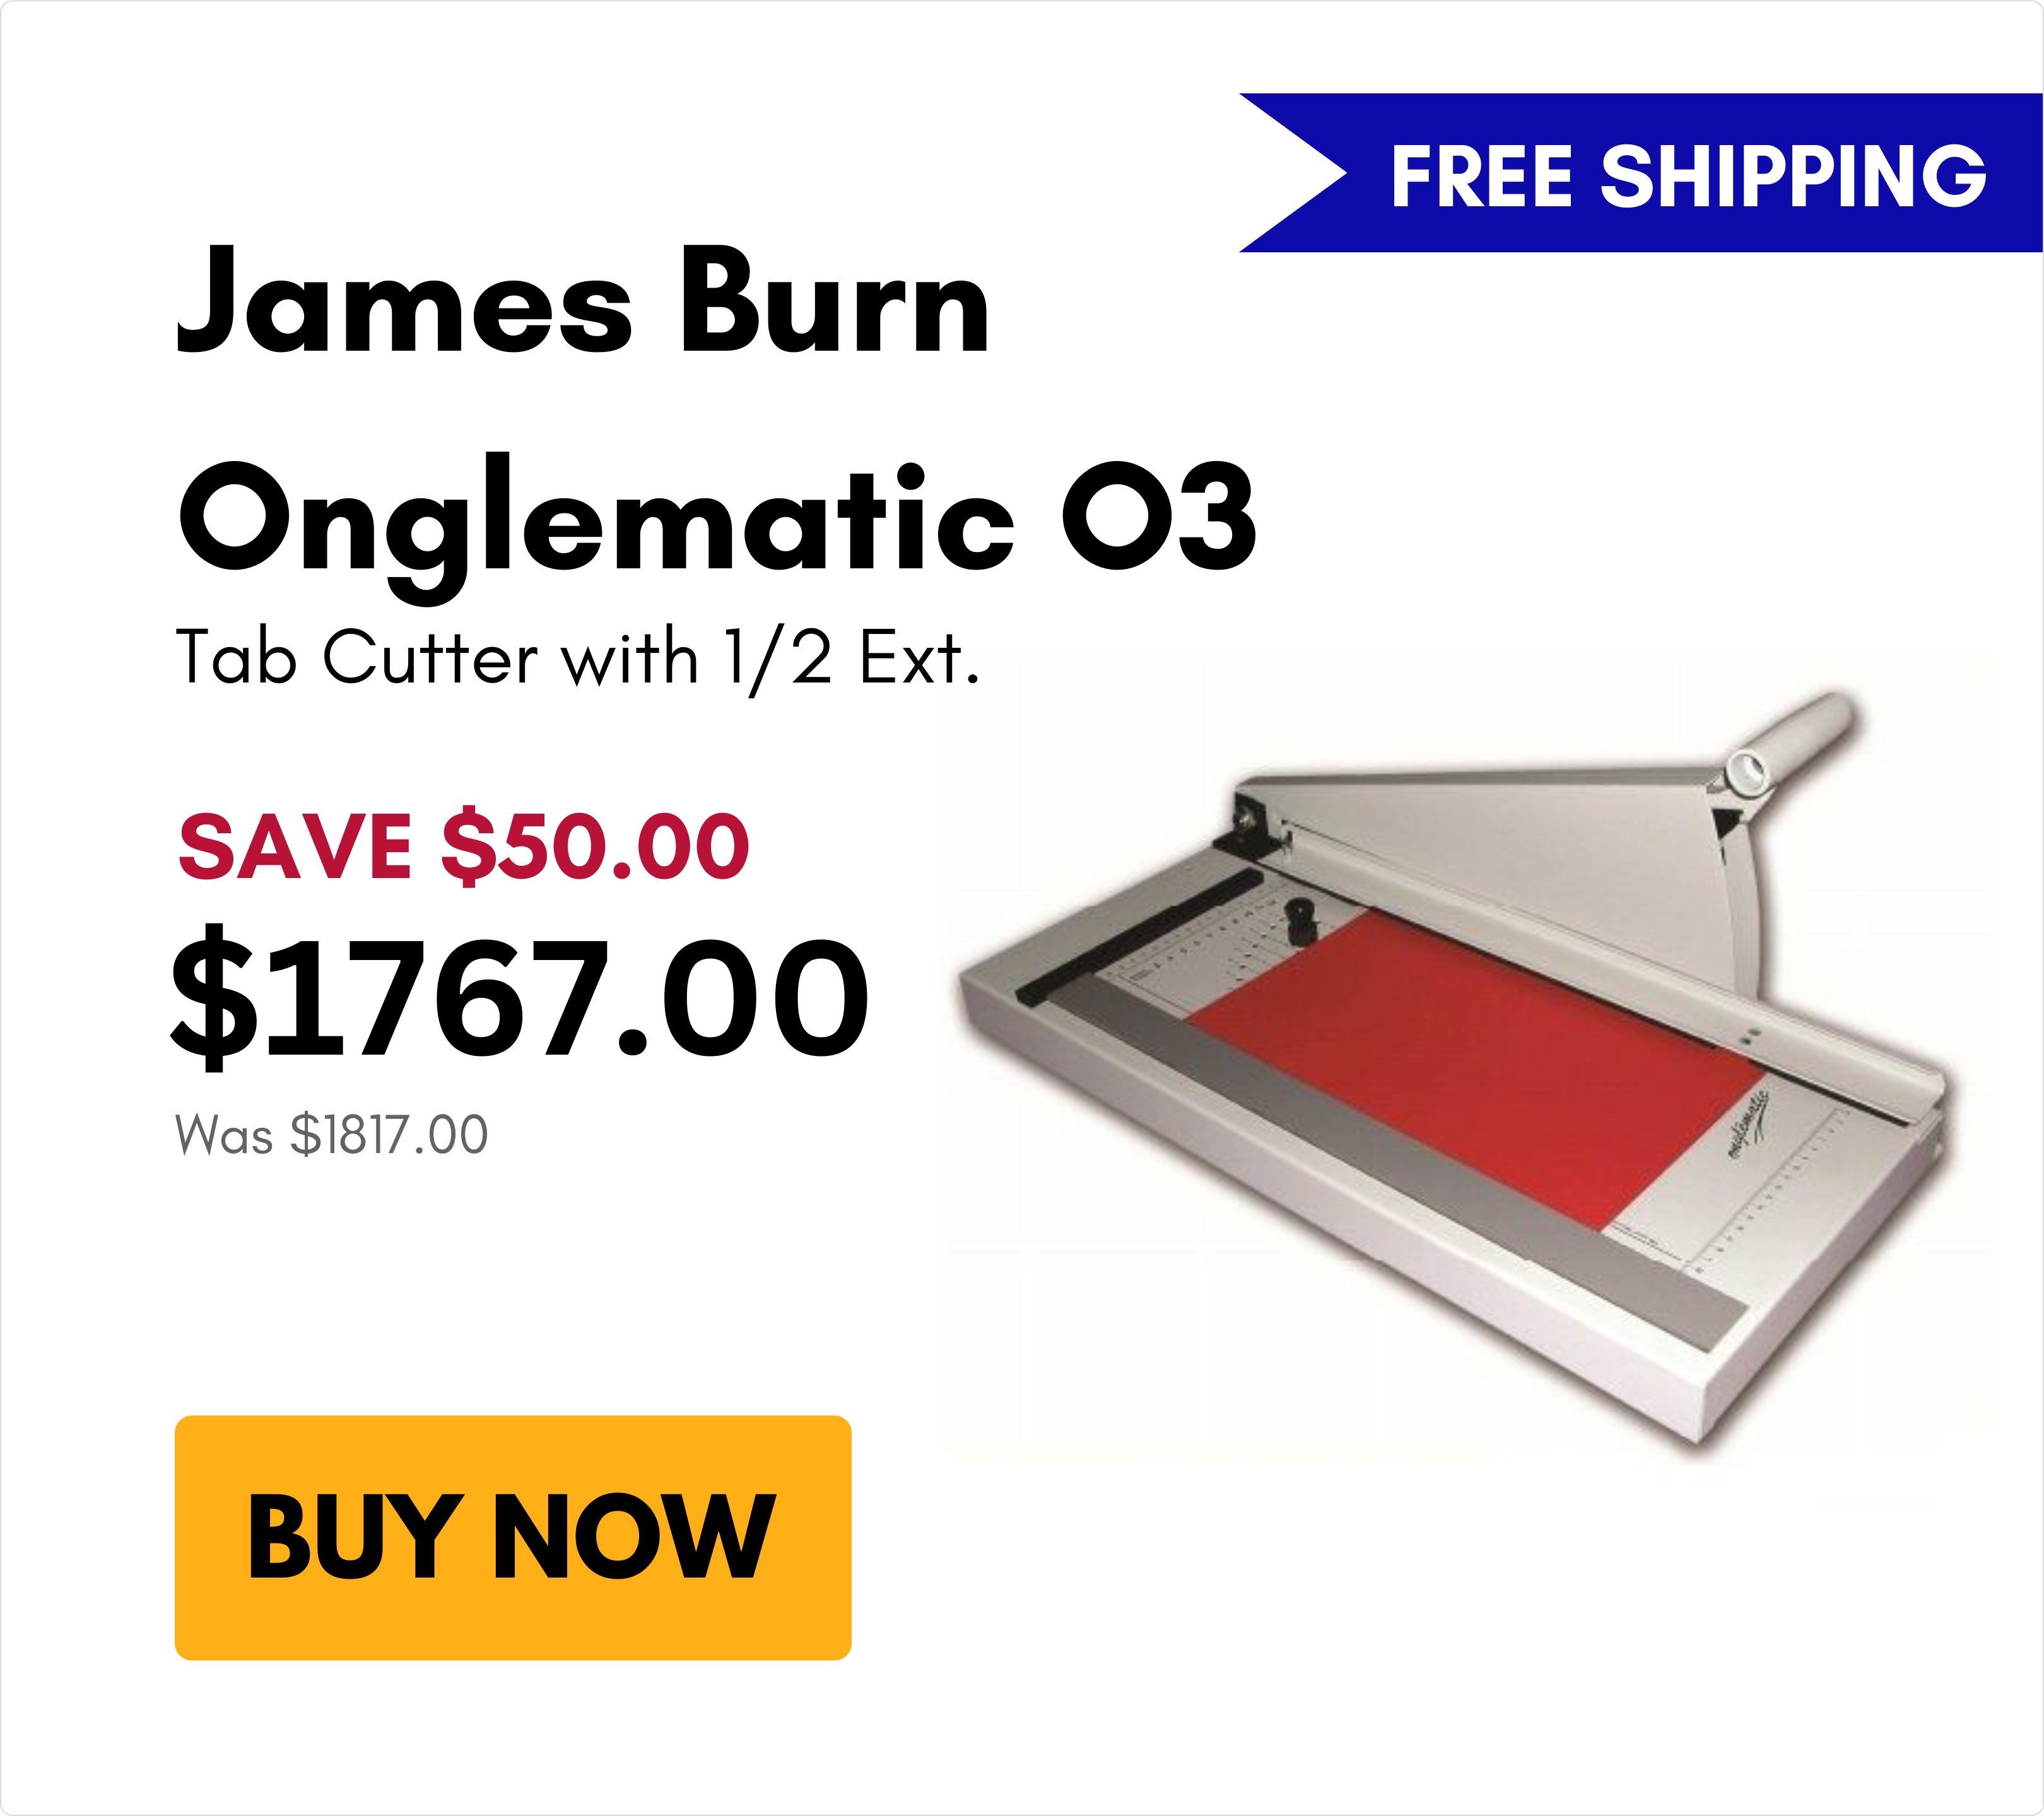 James Burn Onglematic O3 Tab Cutter on sale for $50 off!